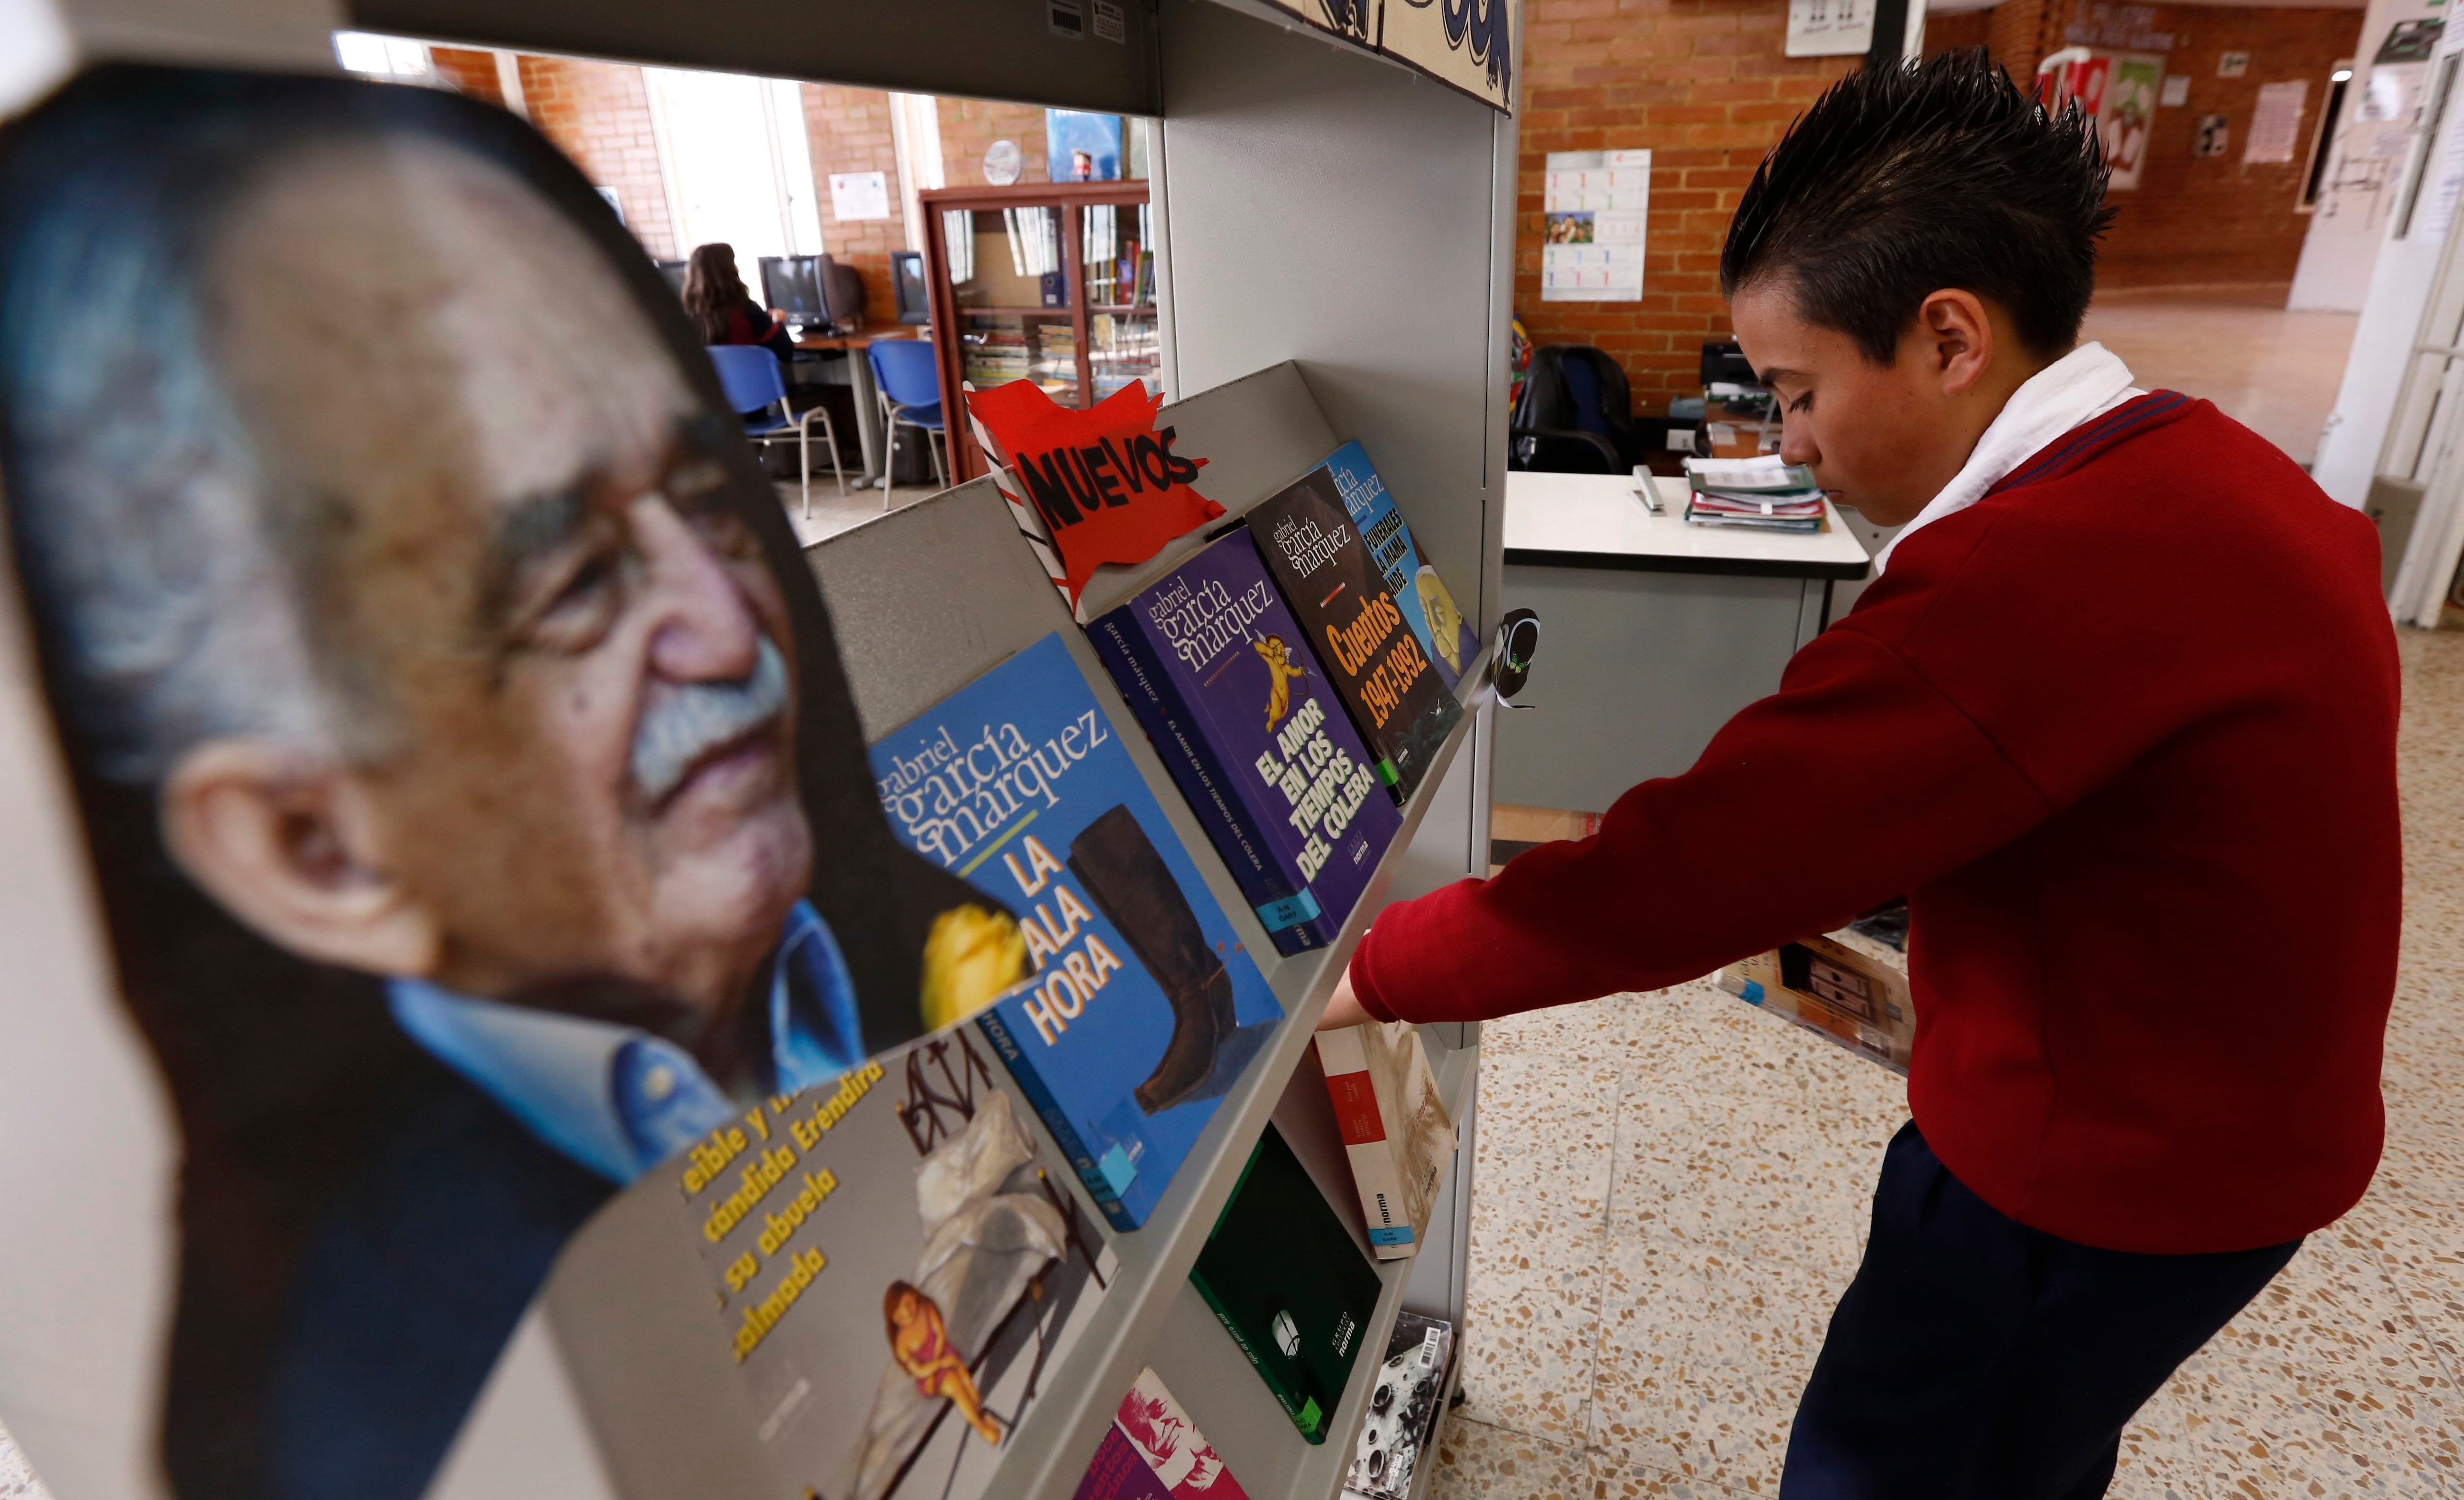 A student organizes books of the late Colombian Nobel Literature laureate Gabriel Garcia Marquez at a school in Bogota, Colombia, Wednesday, April 23, 2014. Colombia's Culture Ministry is promoting a marathon reading of Garcia Marquez's books across Colombia in honor of the author who died in Mexico City on April 17, 2014. (AP Photo/Fernando Vergara)